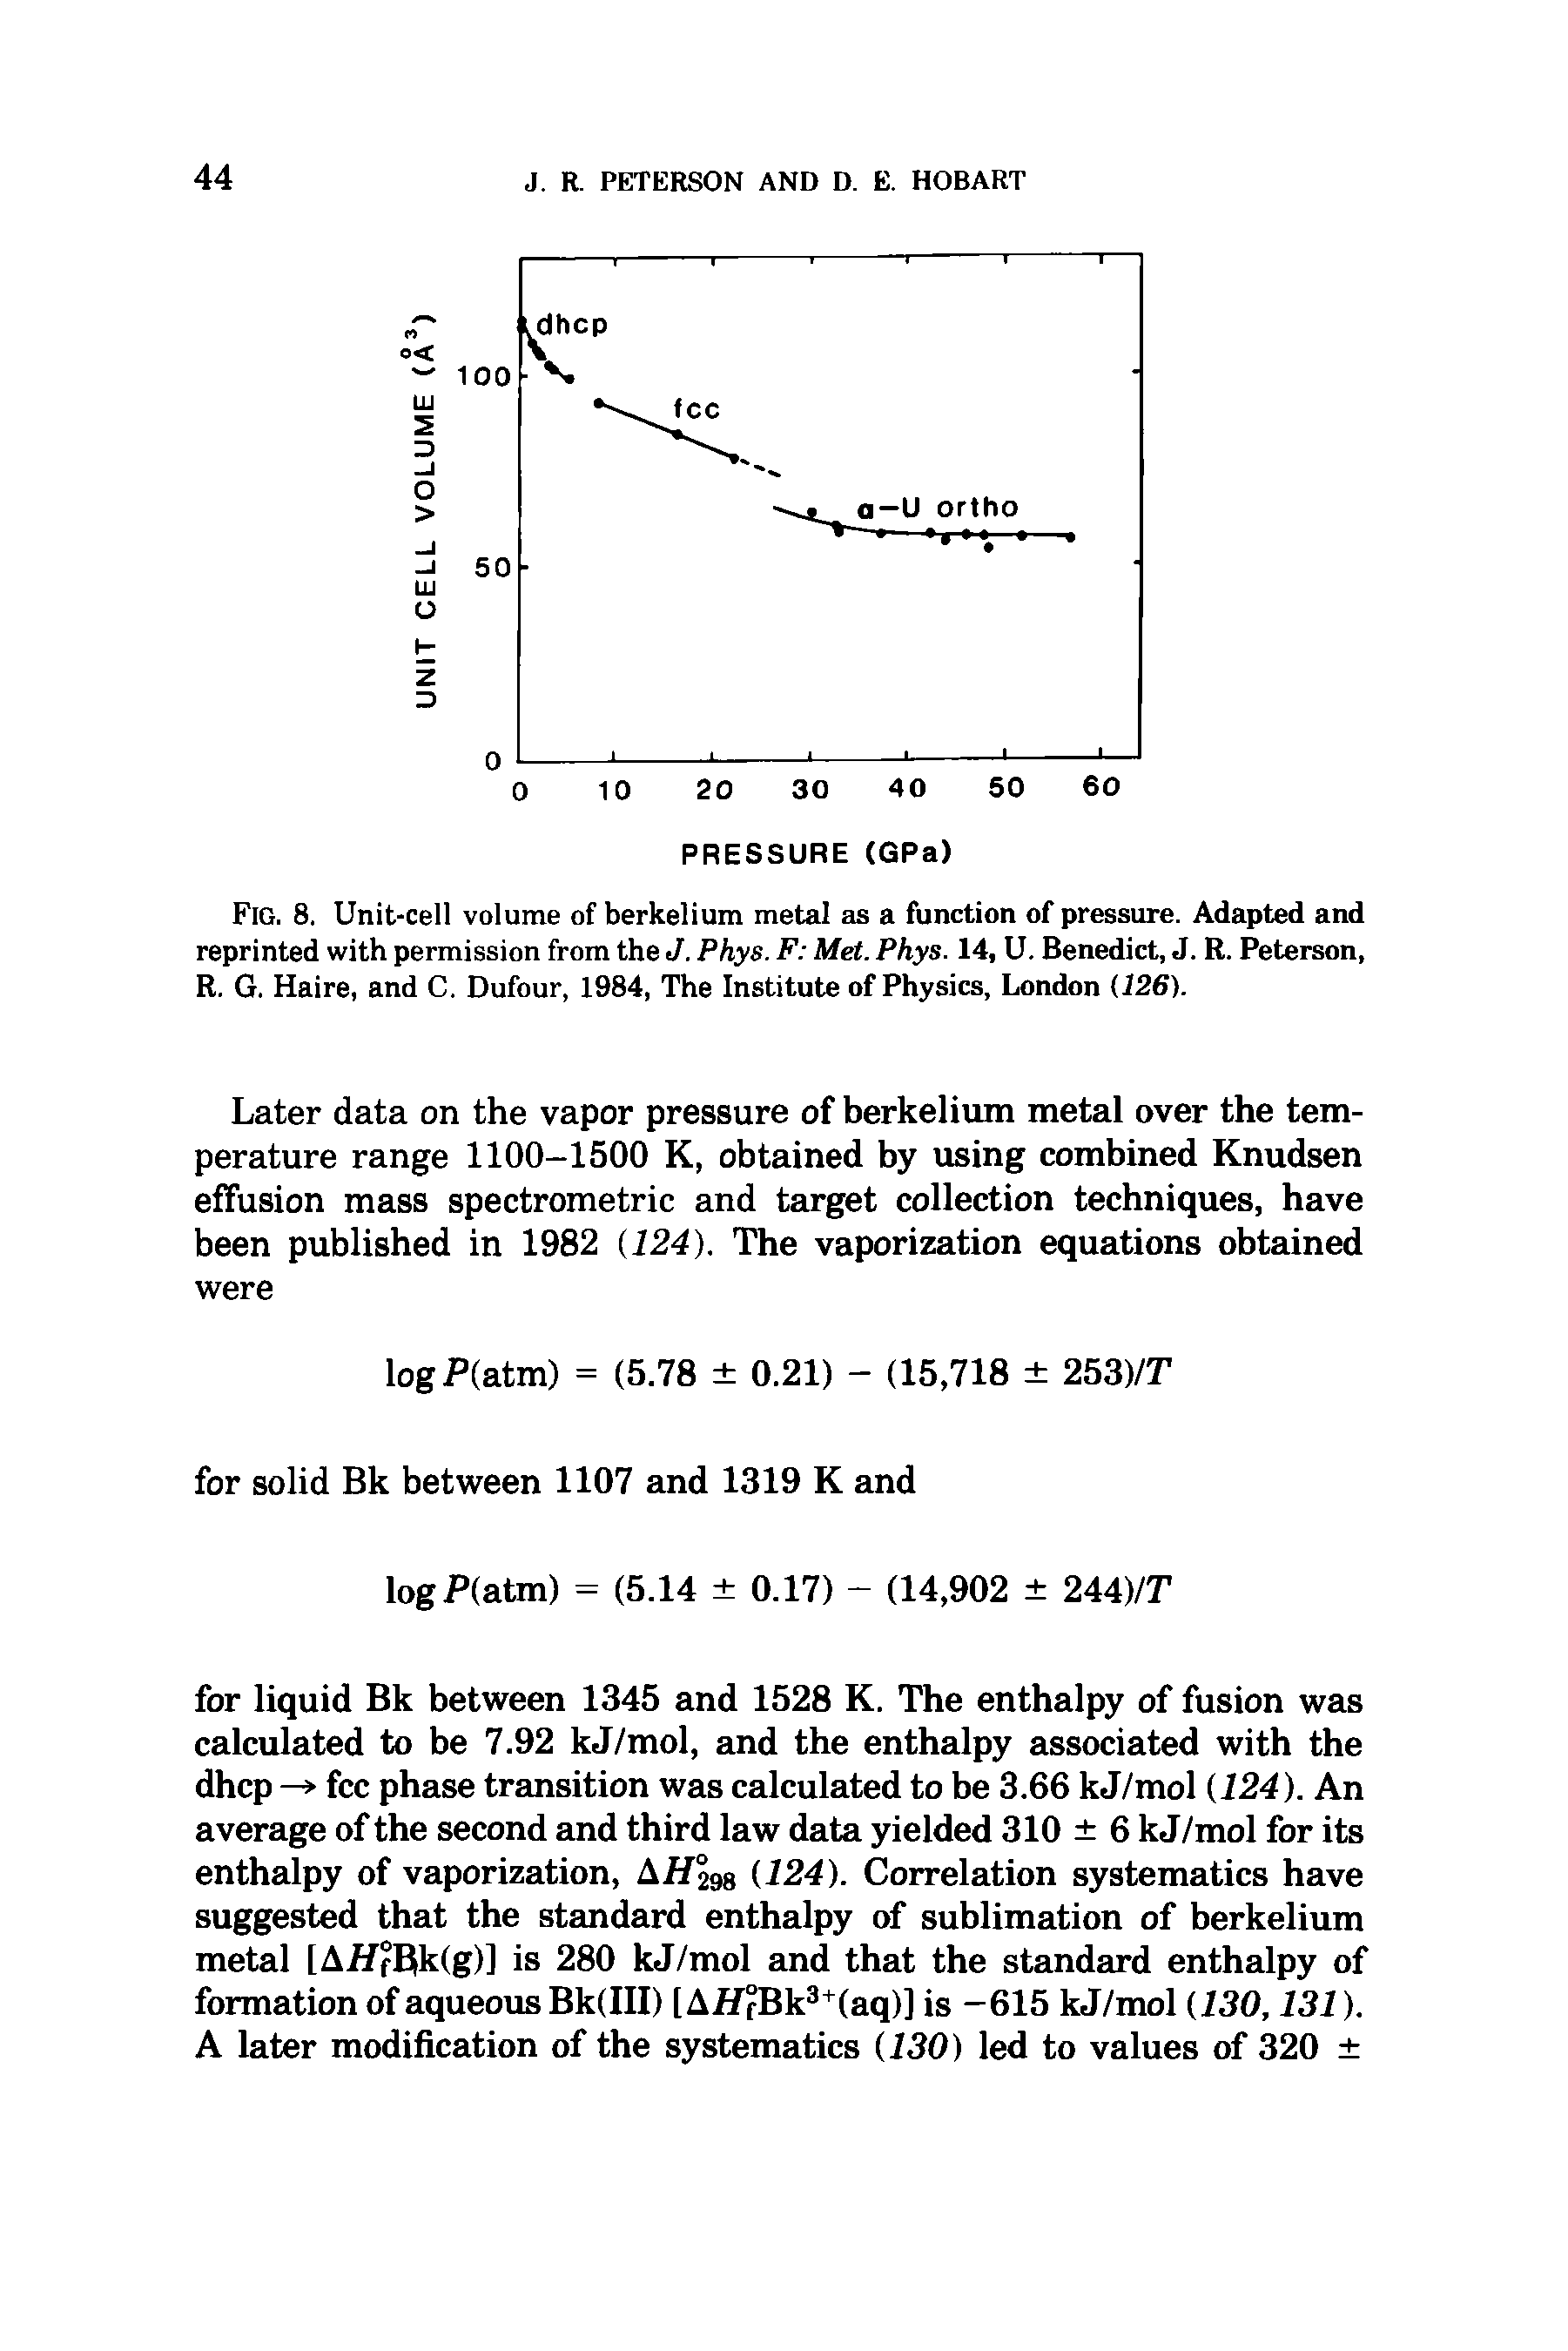 Fig. 8. Unit-cell volume of berkelium metal as a function of pressure. Adapted and reprinted with permission from the J. Phys. F Met. Phys. 14, U. Benedict, J. R. Peterson, R. G. Haire, and C. Dufour, 1984, The Institute of Physics, London (126).